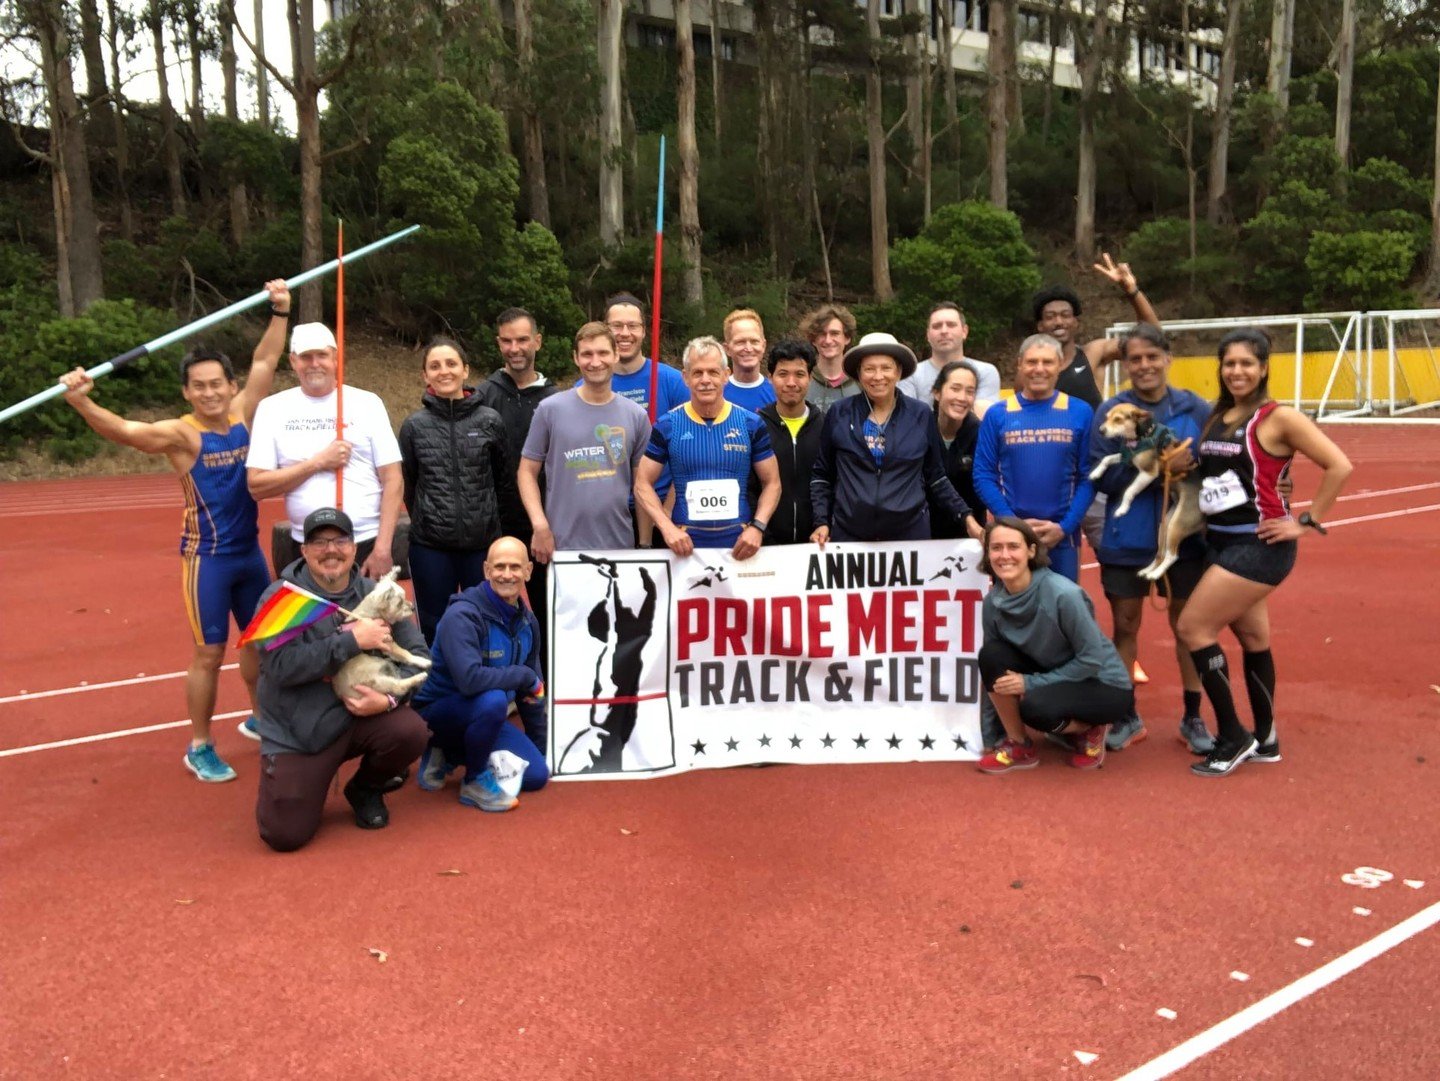 The annual @sftrackandfield Pride Meet is on Saturday June 17th! Pride Meet is USATF-sanctioned track and field meet designed to provide athletes of all sexual orientations and gender identities with an opportunity to compete together in a welcoming 